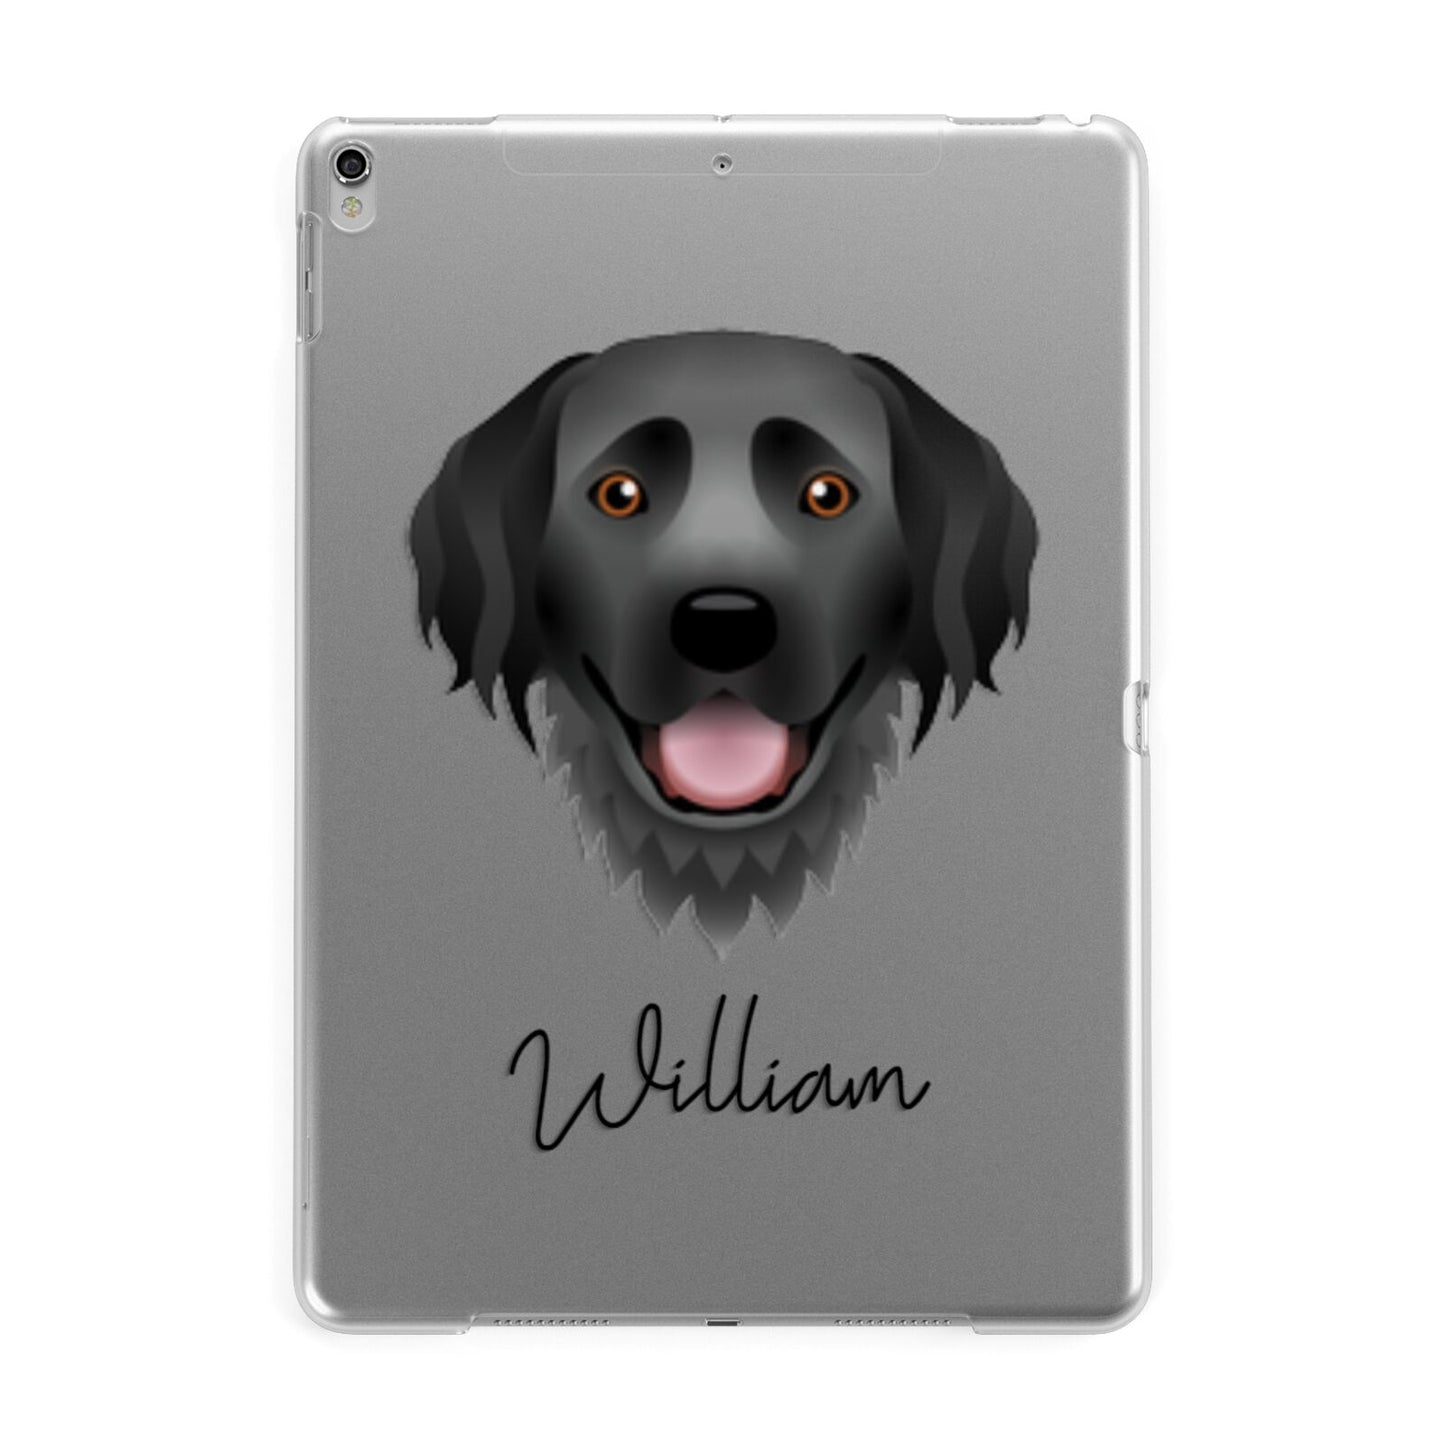 Hovawart Personalised Apple iPad Silver Case